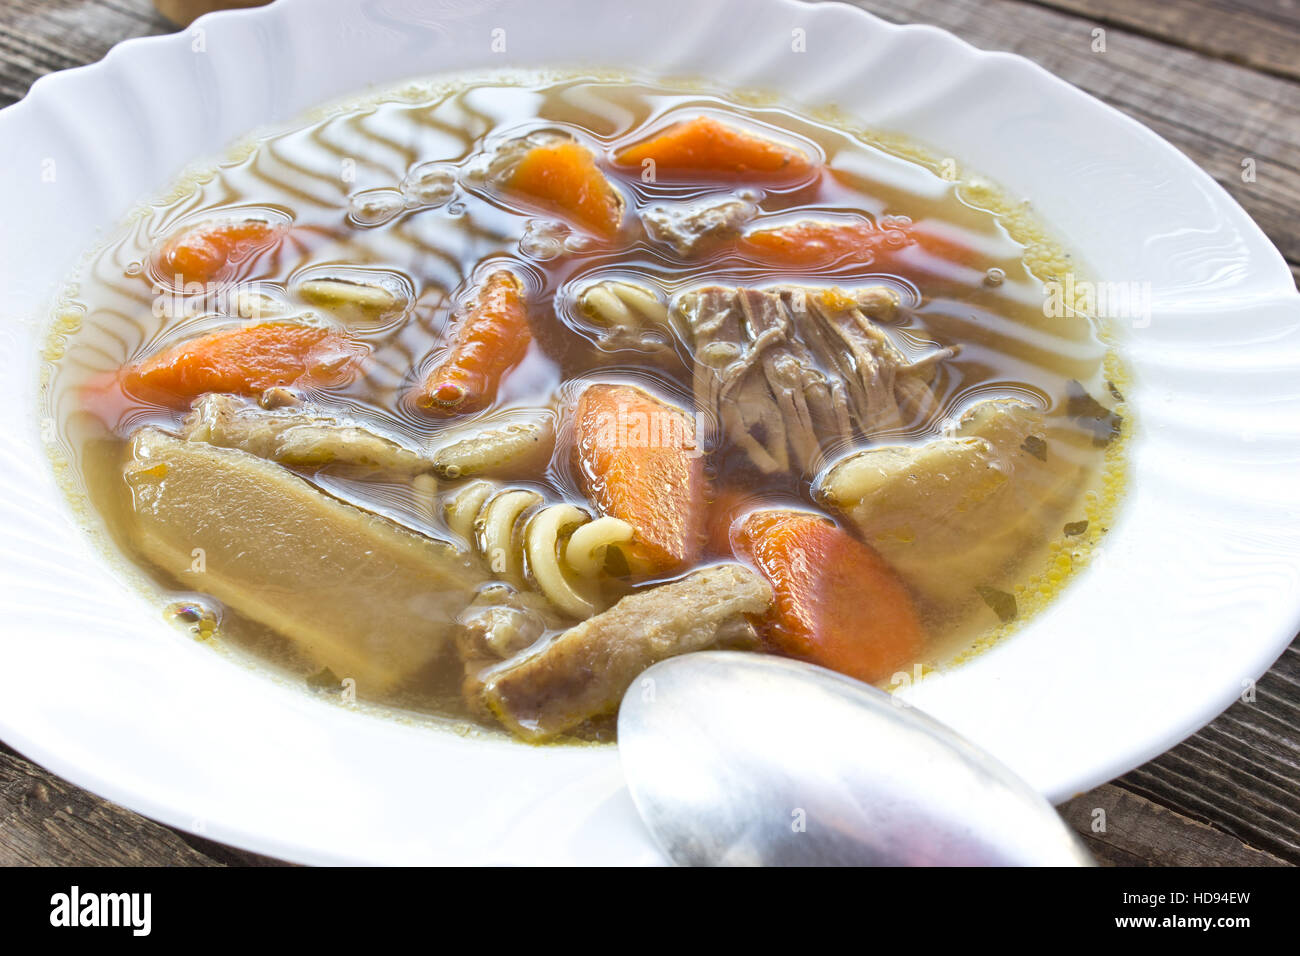 Beef and vegetable broth soup in plate with spoon Stock Photo